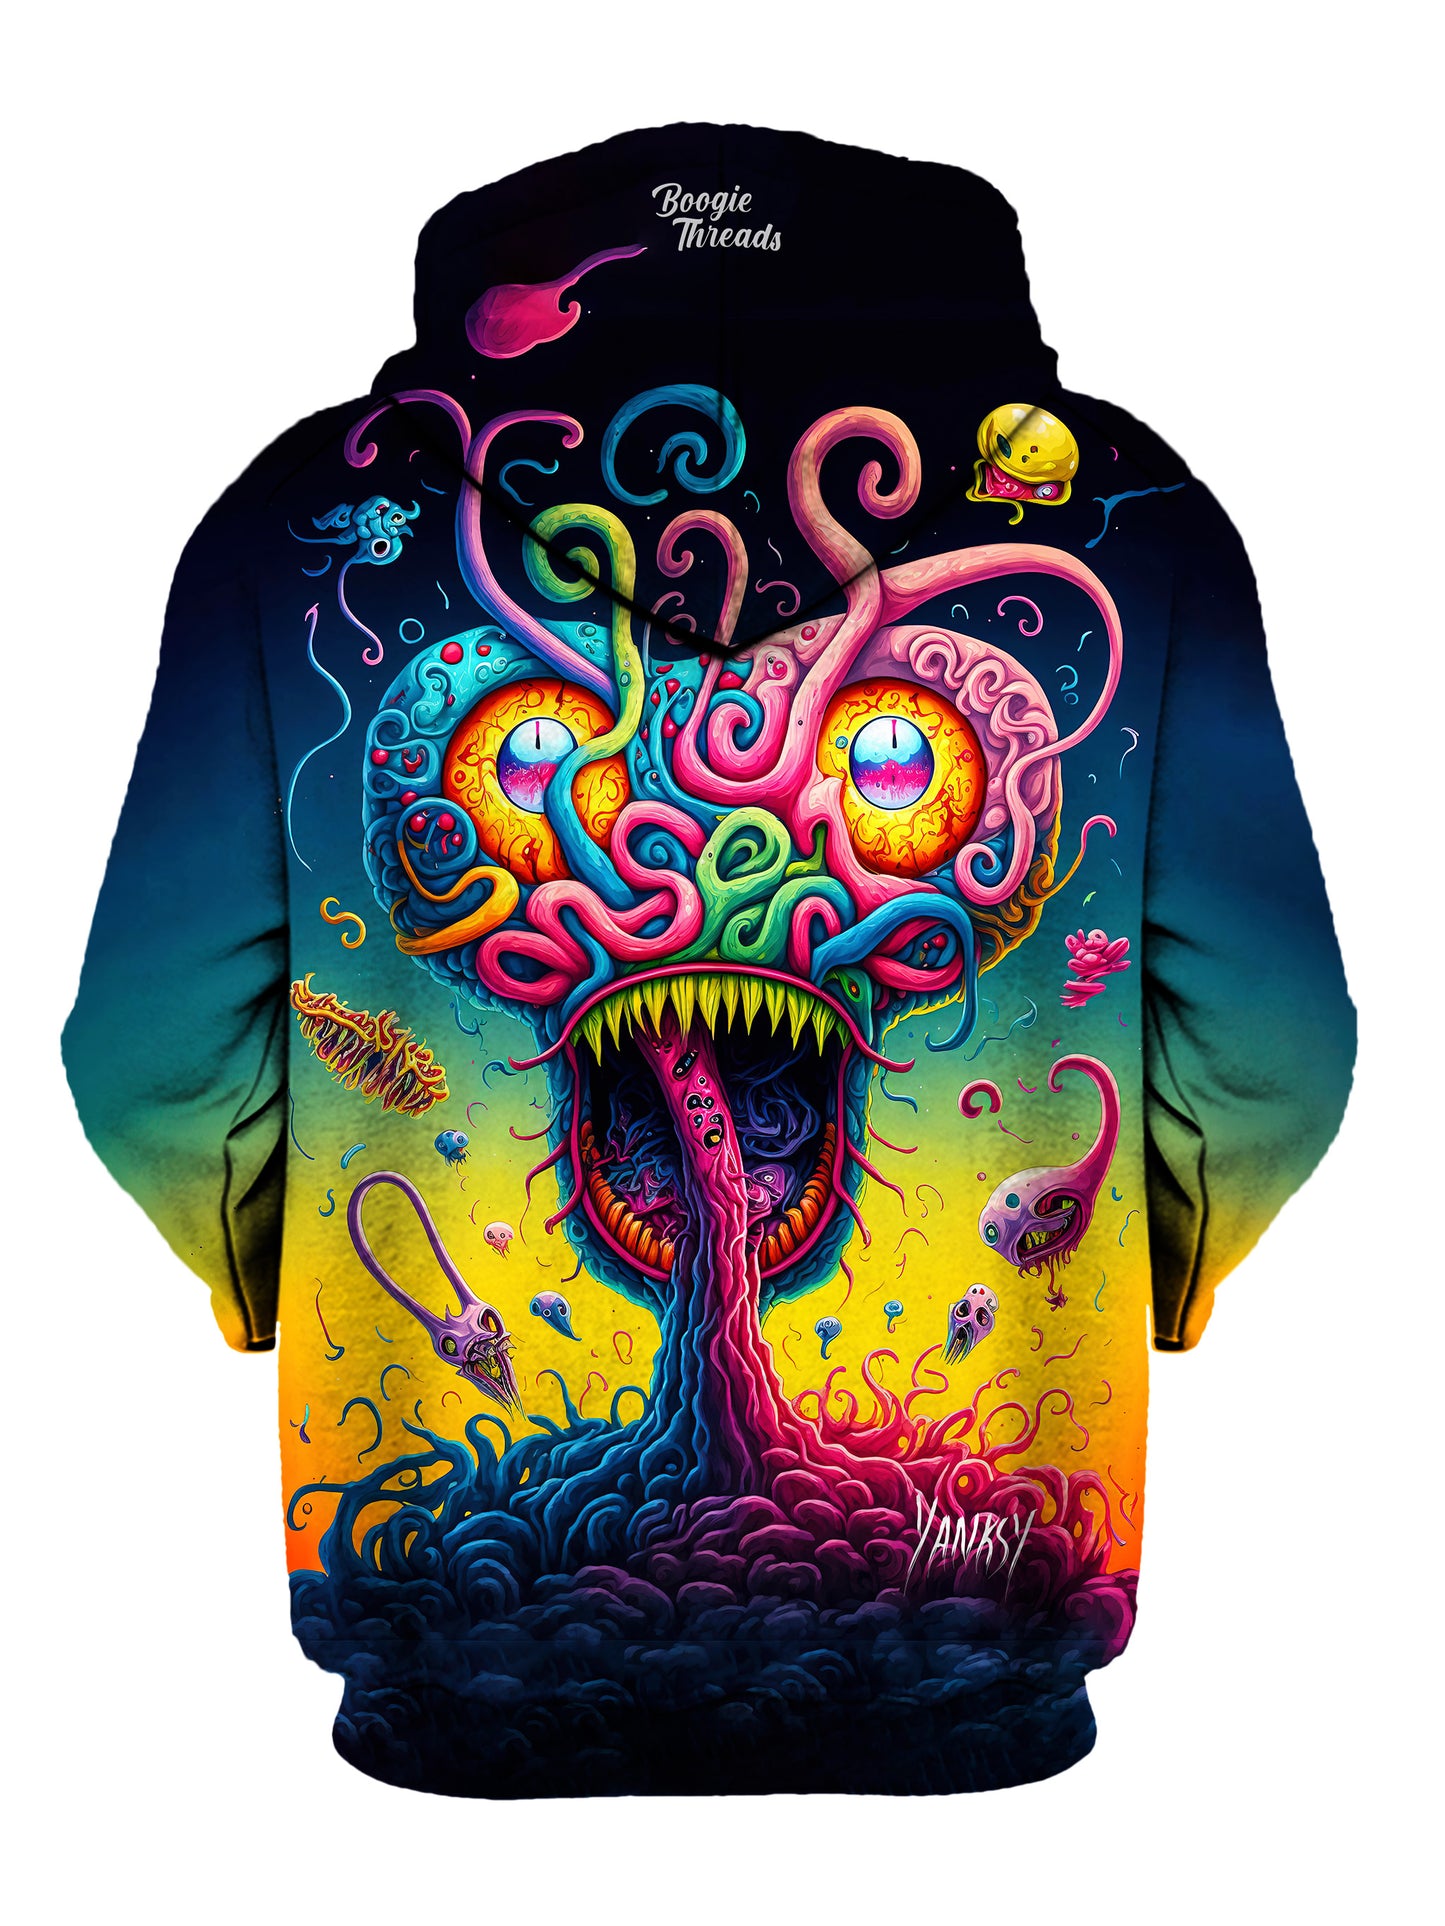 Make a statement with this bold and eye-catching hoodie